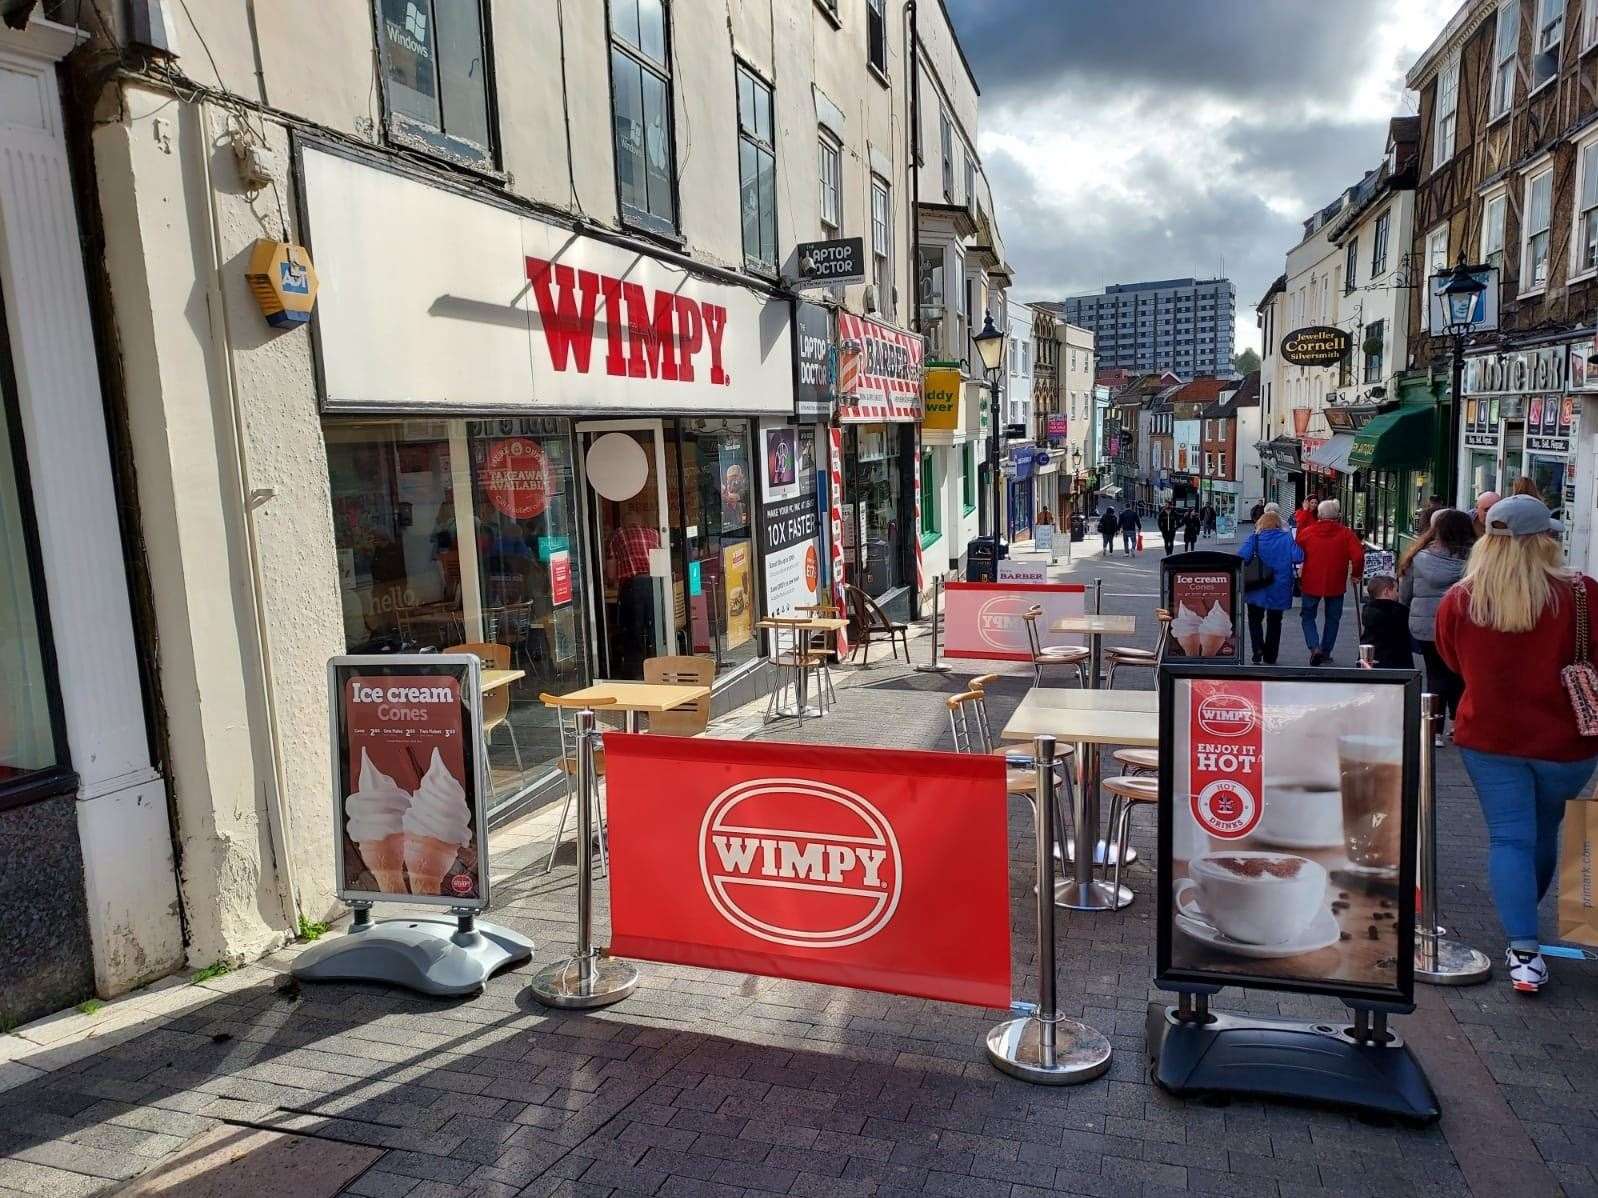 Outside Wimpy in Gabriels Hill, Maidstone you could not tell it was a buzzing metropolis inside Picture: KMG